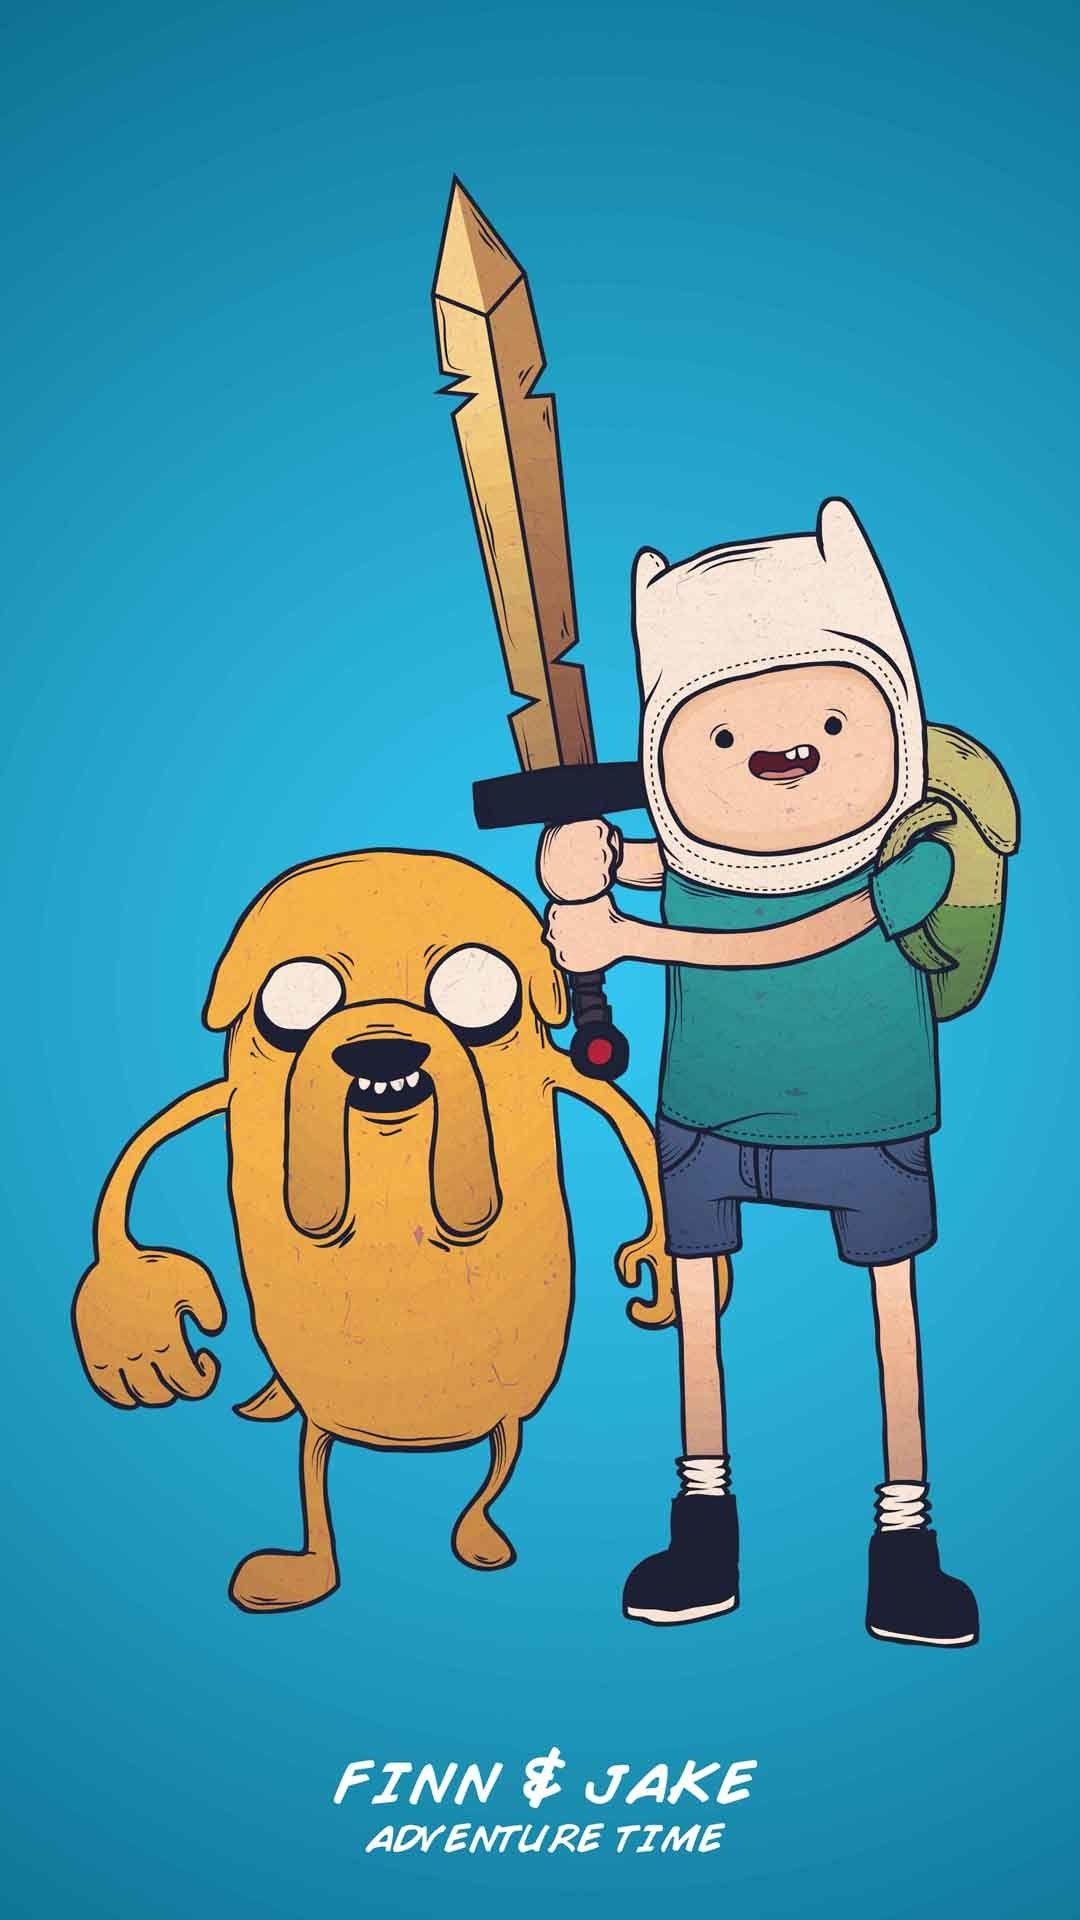 Aesthetic Adventure Time Wallpaper Android #aesthetic #adventure